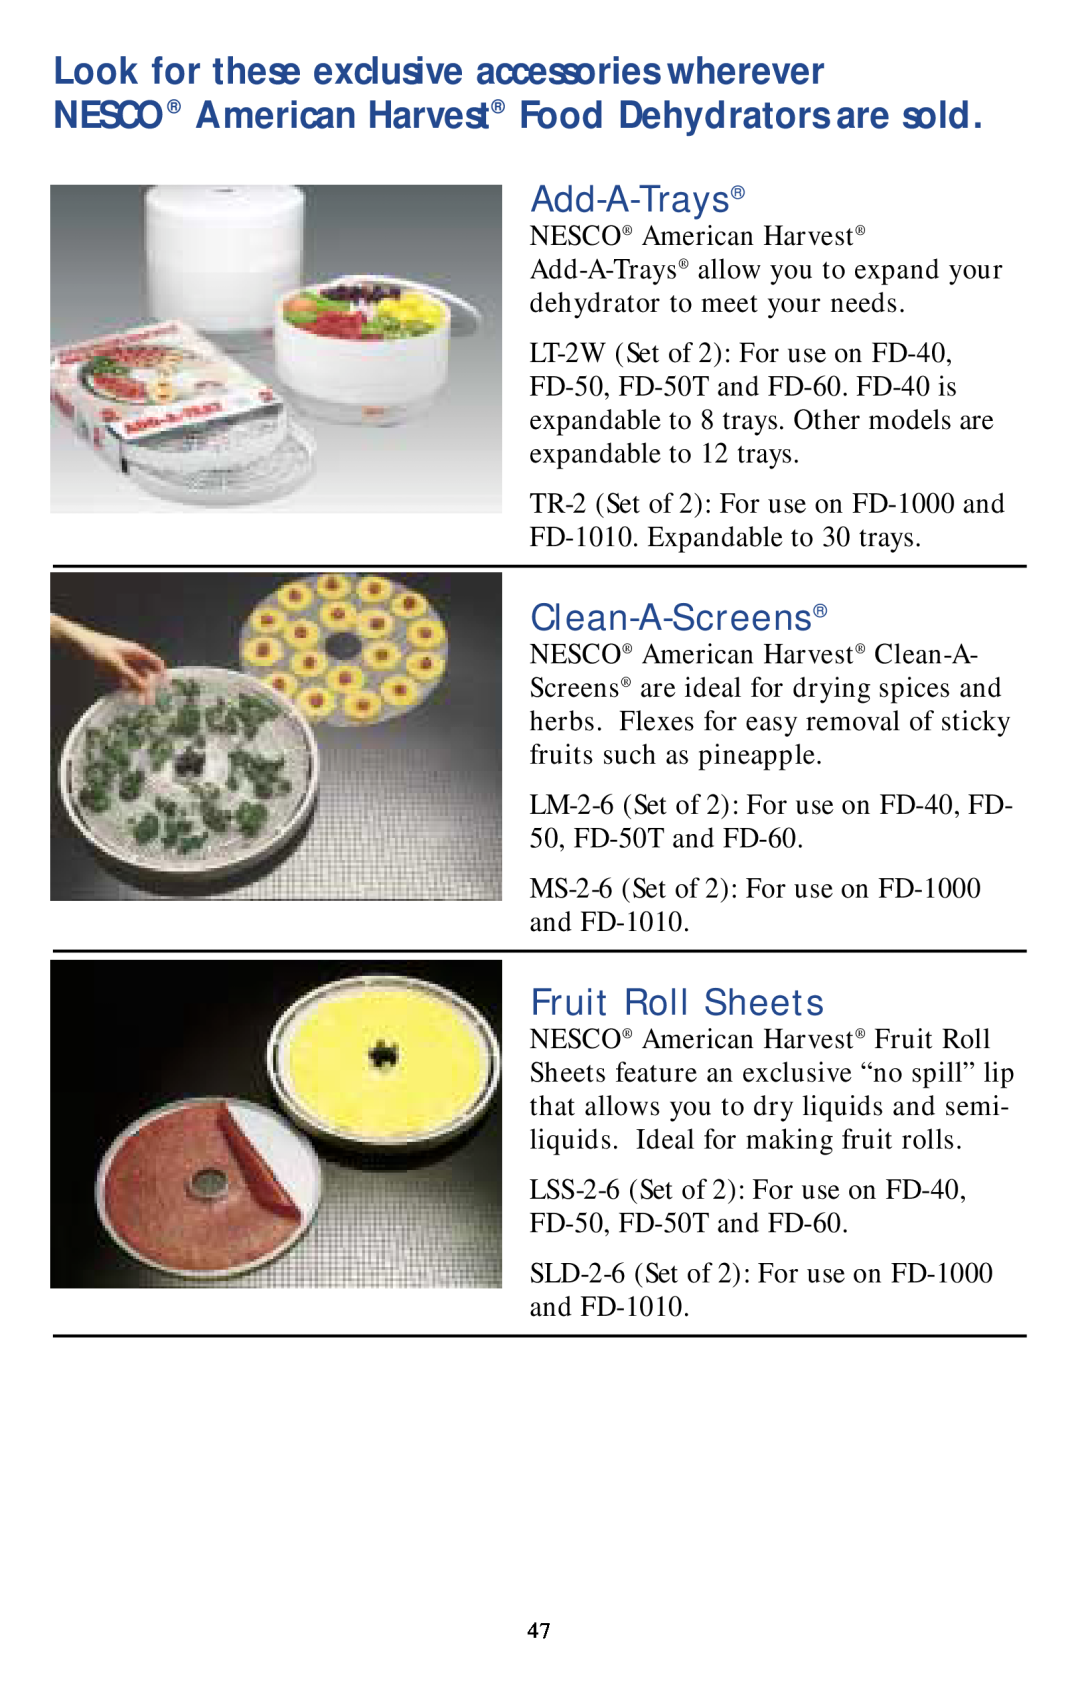 Nesco Look for these exclusive accessories wherever, NESCO American Harvest Food Dehydrators are sold, Add-A-Trays 